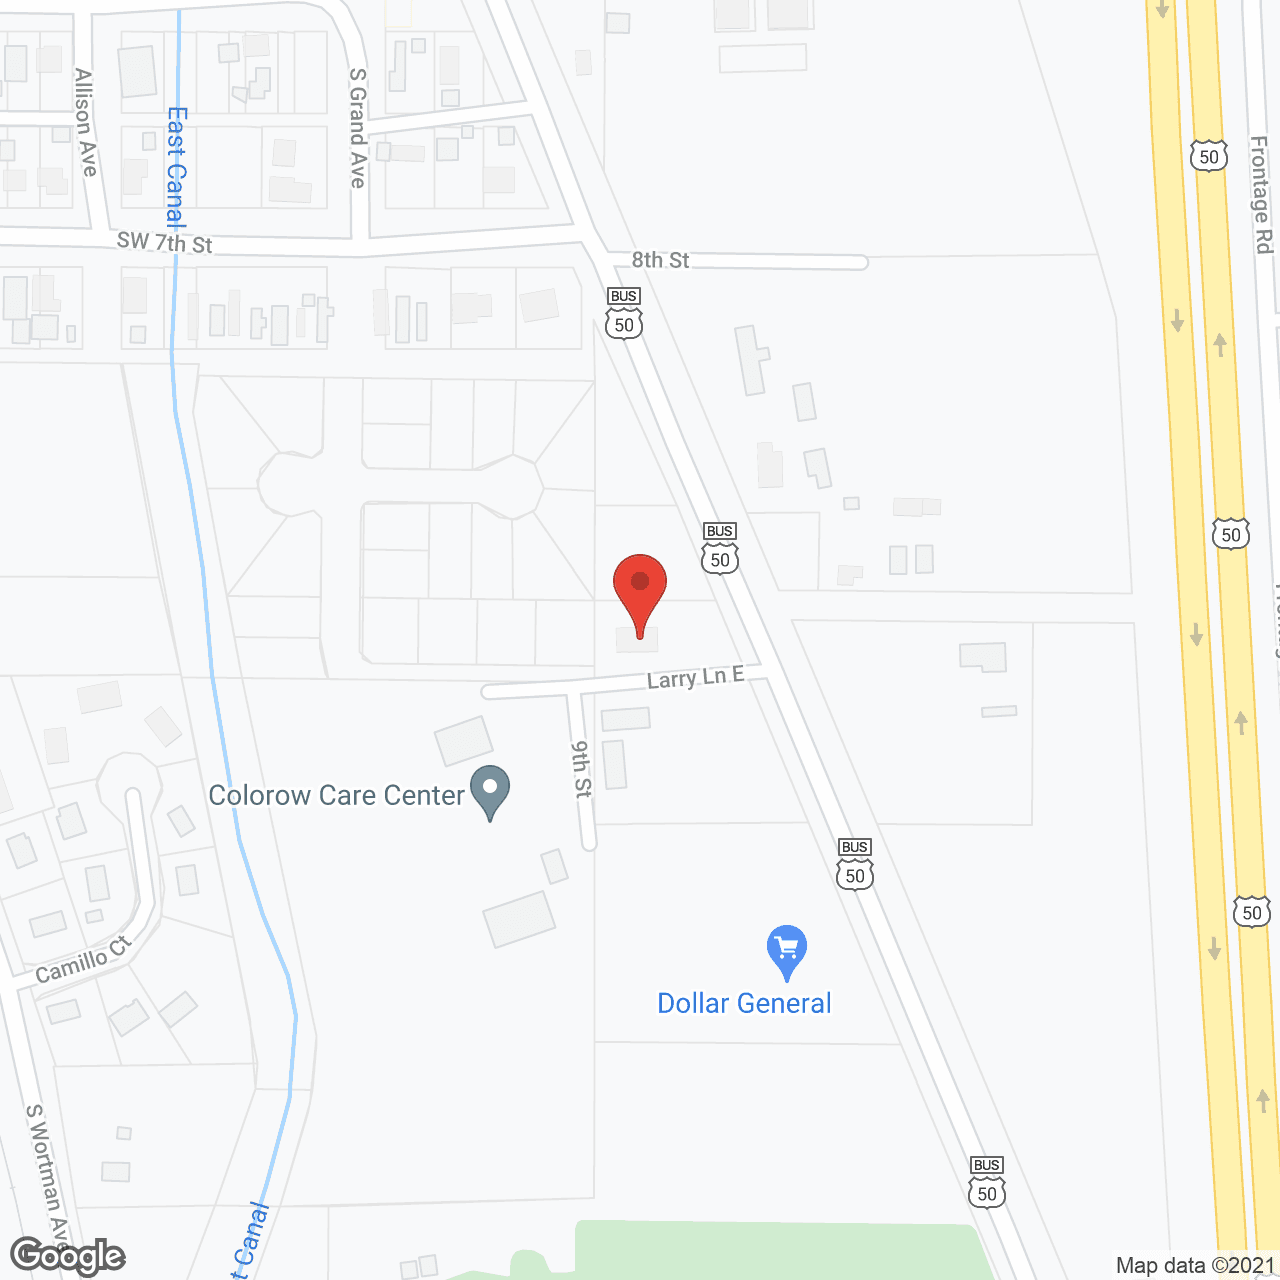 Colorow Care Ctr in google map